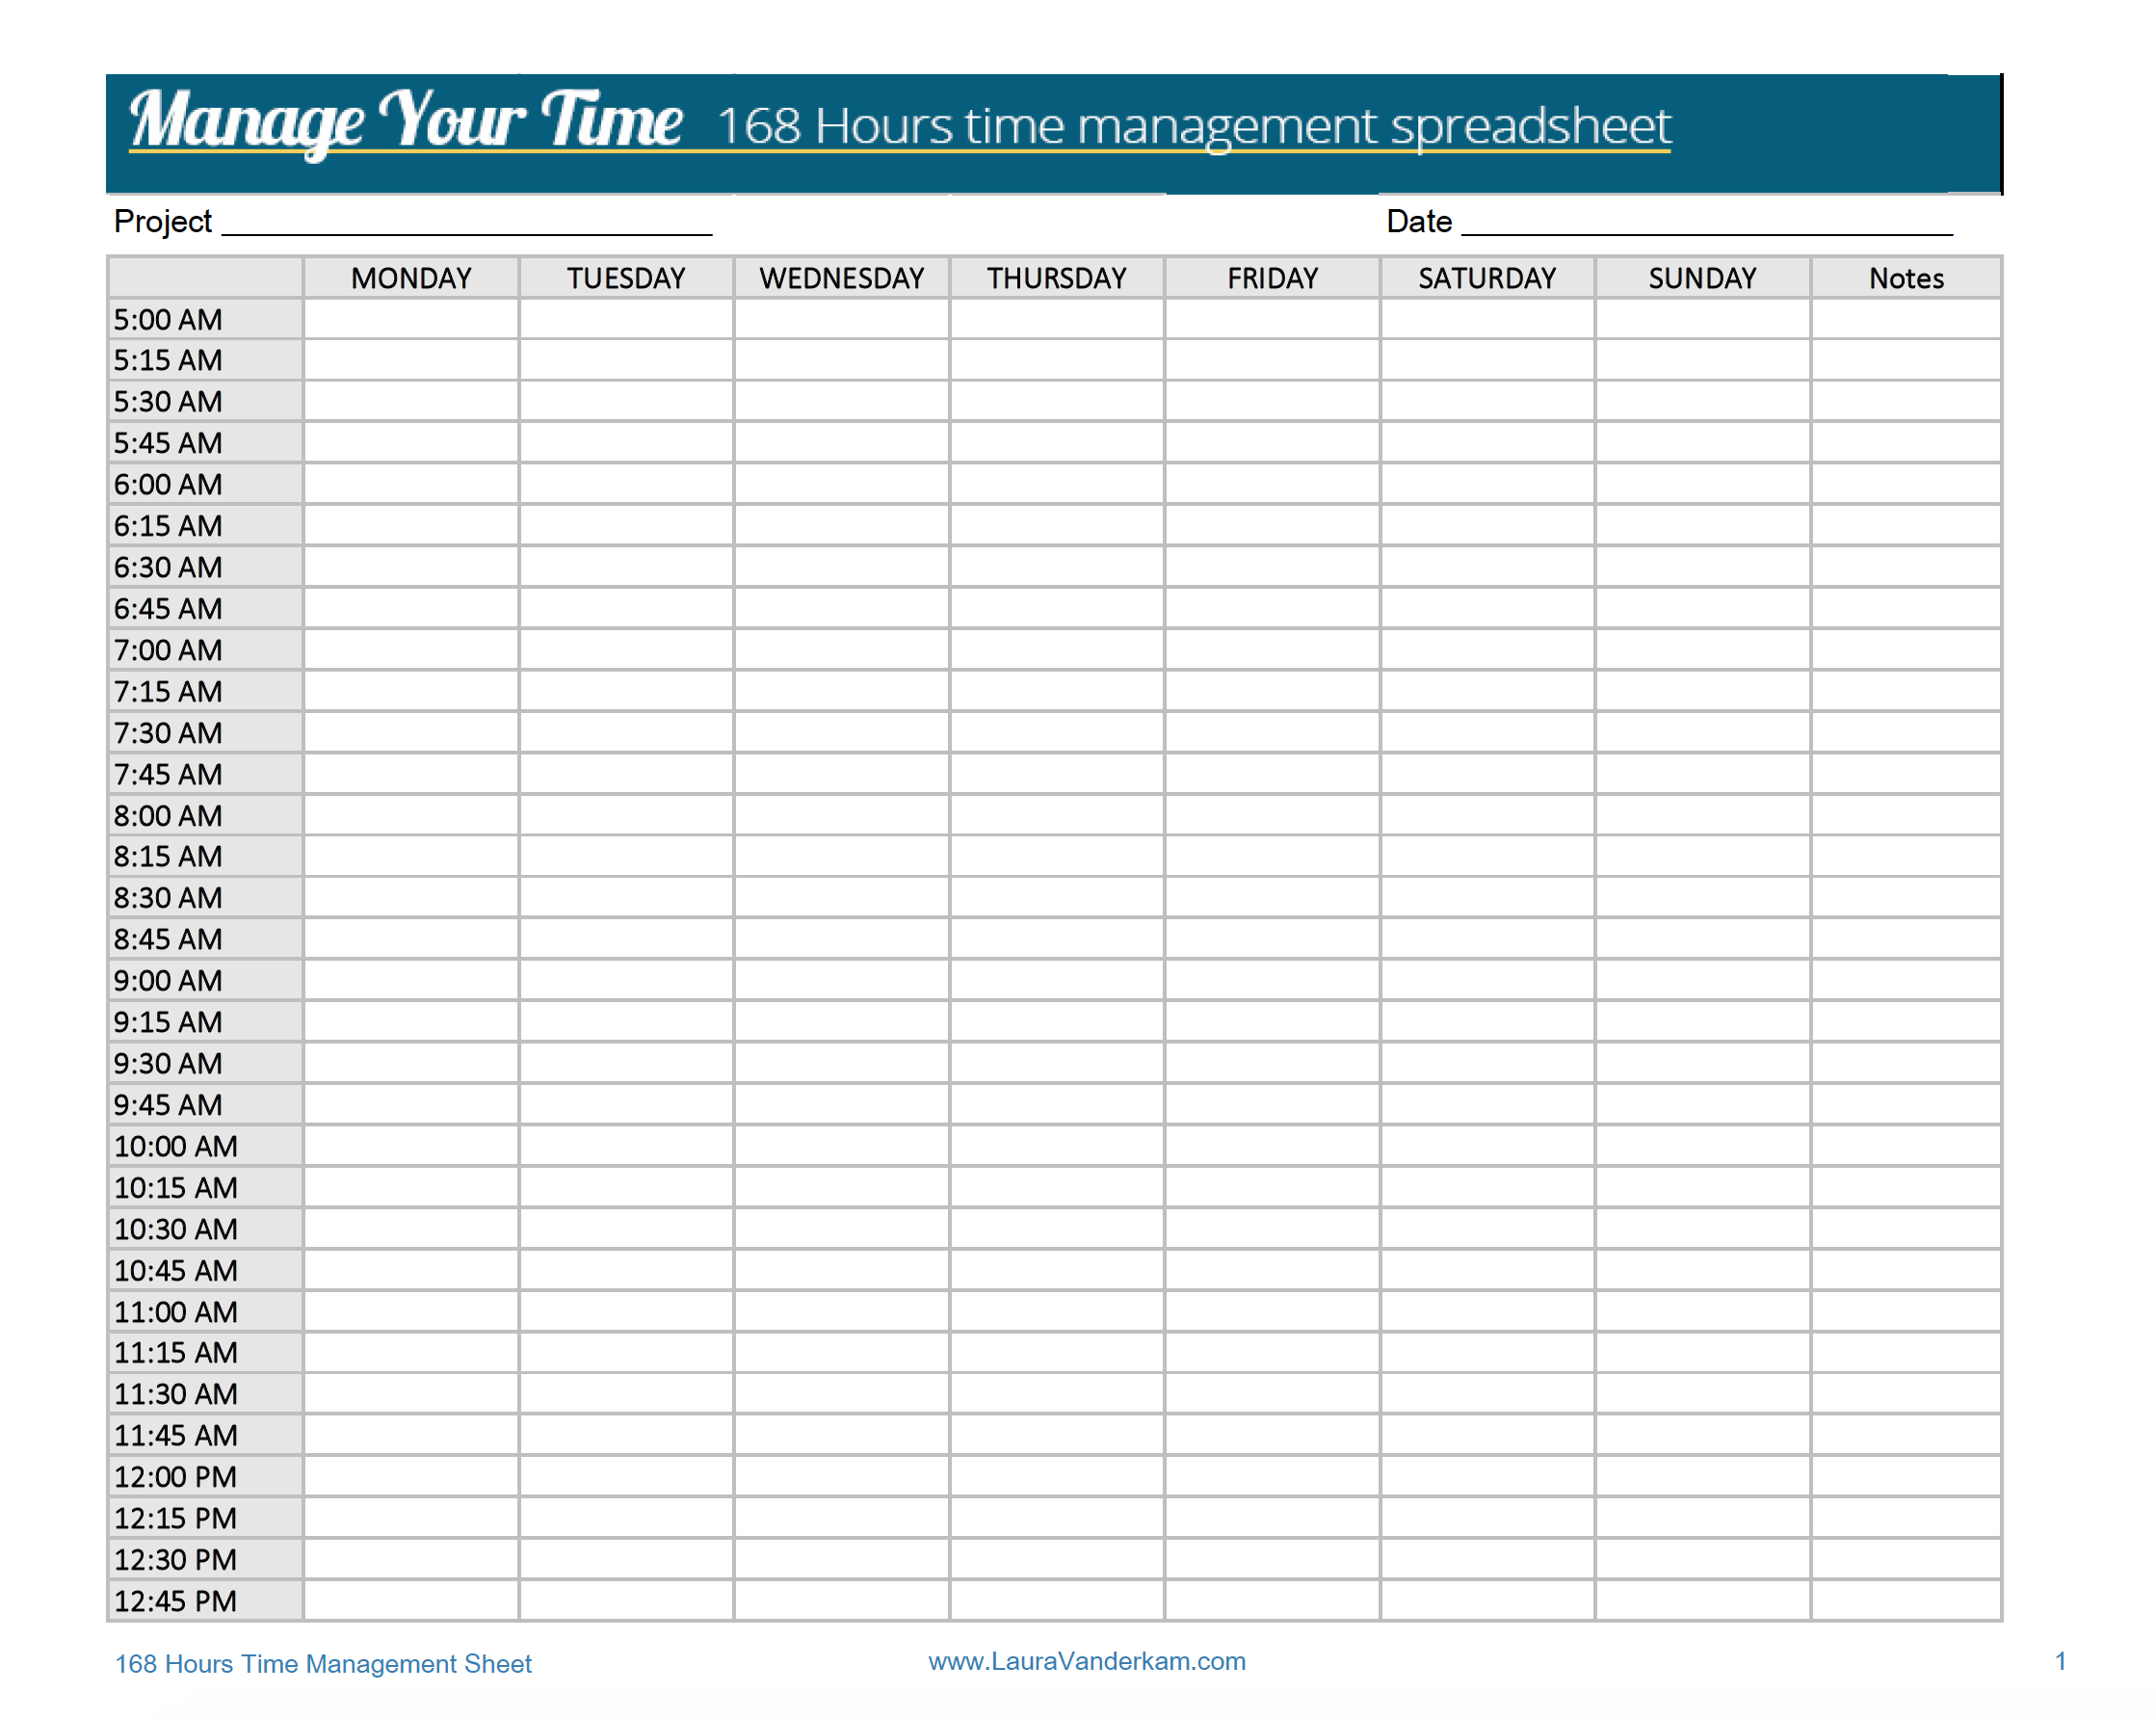 A table headed "Maanage your time - 168 hours time management spreadsheet" with columns Monday to Sunday and rows 5.00 am to 12.45 pm in 15-minute increments